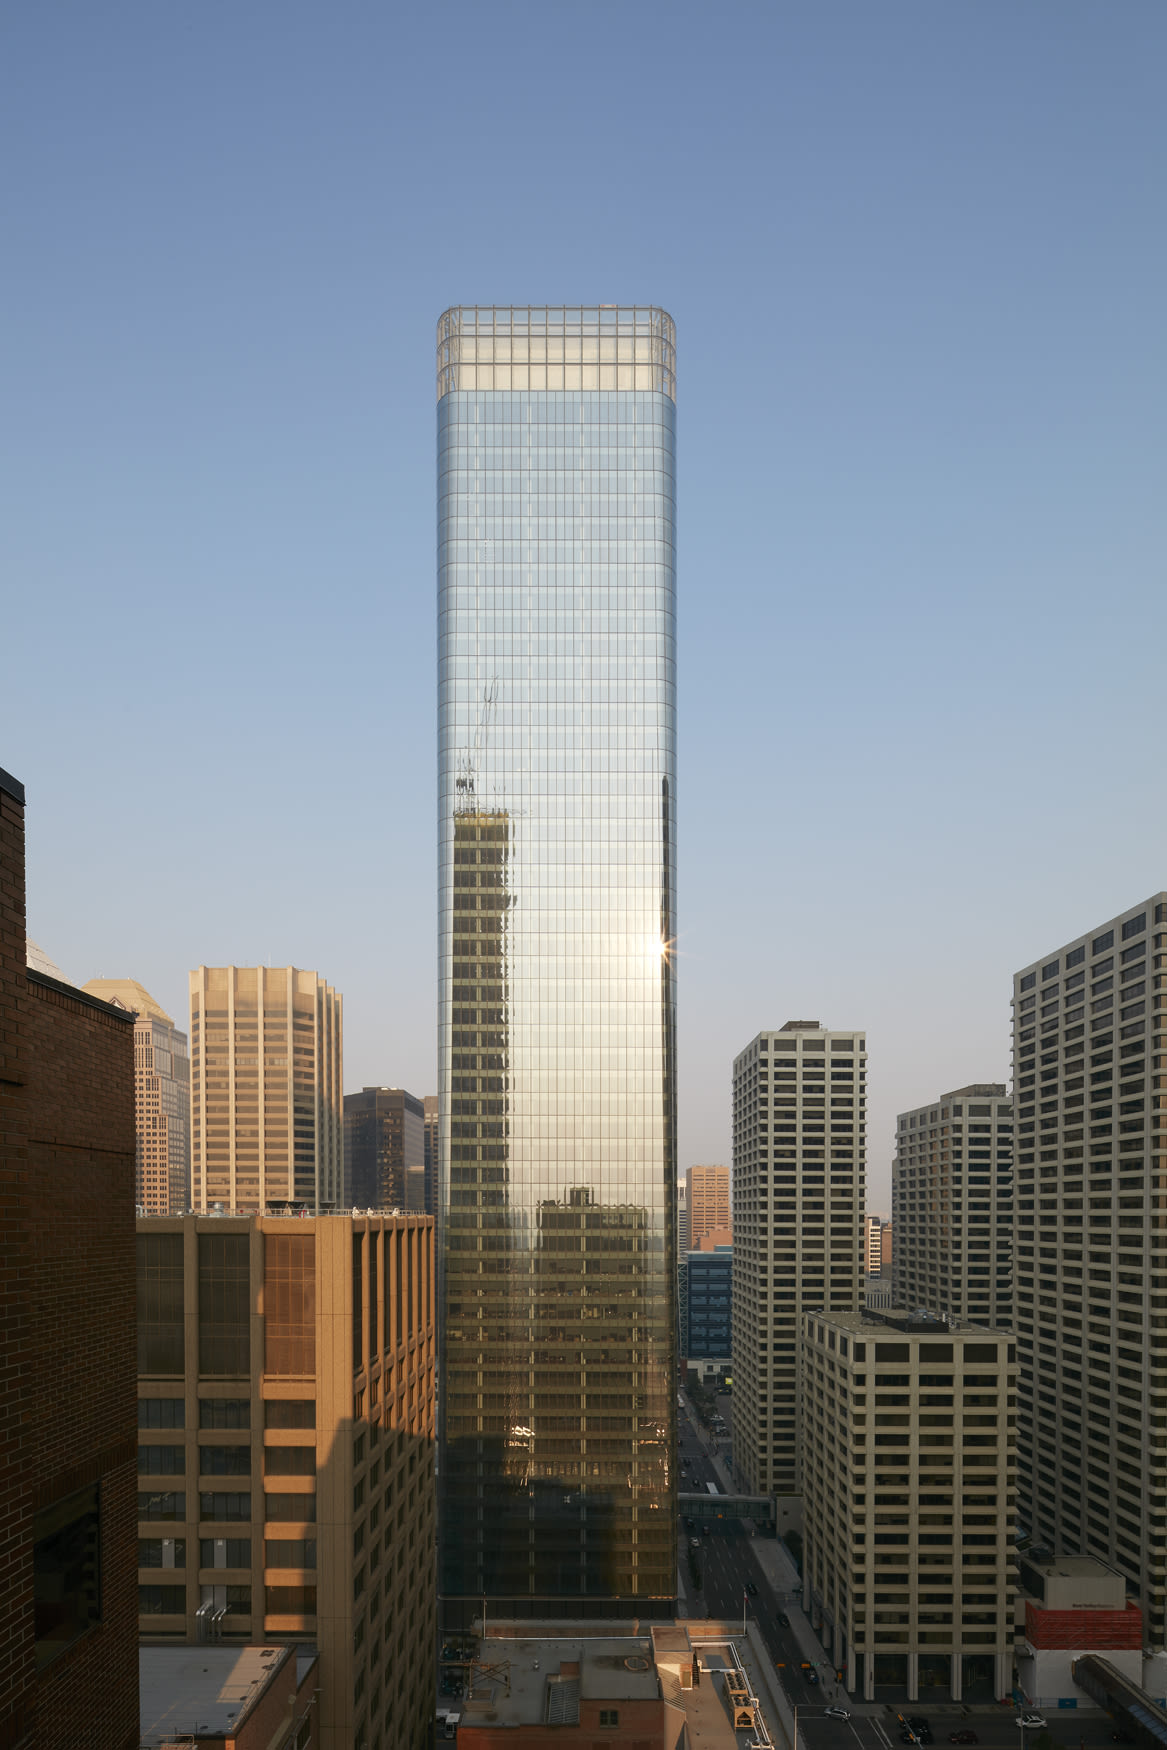 The East Tower's elegant silhouette reflects and refracts the clear sunlight from the Rockies